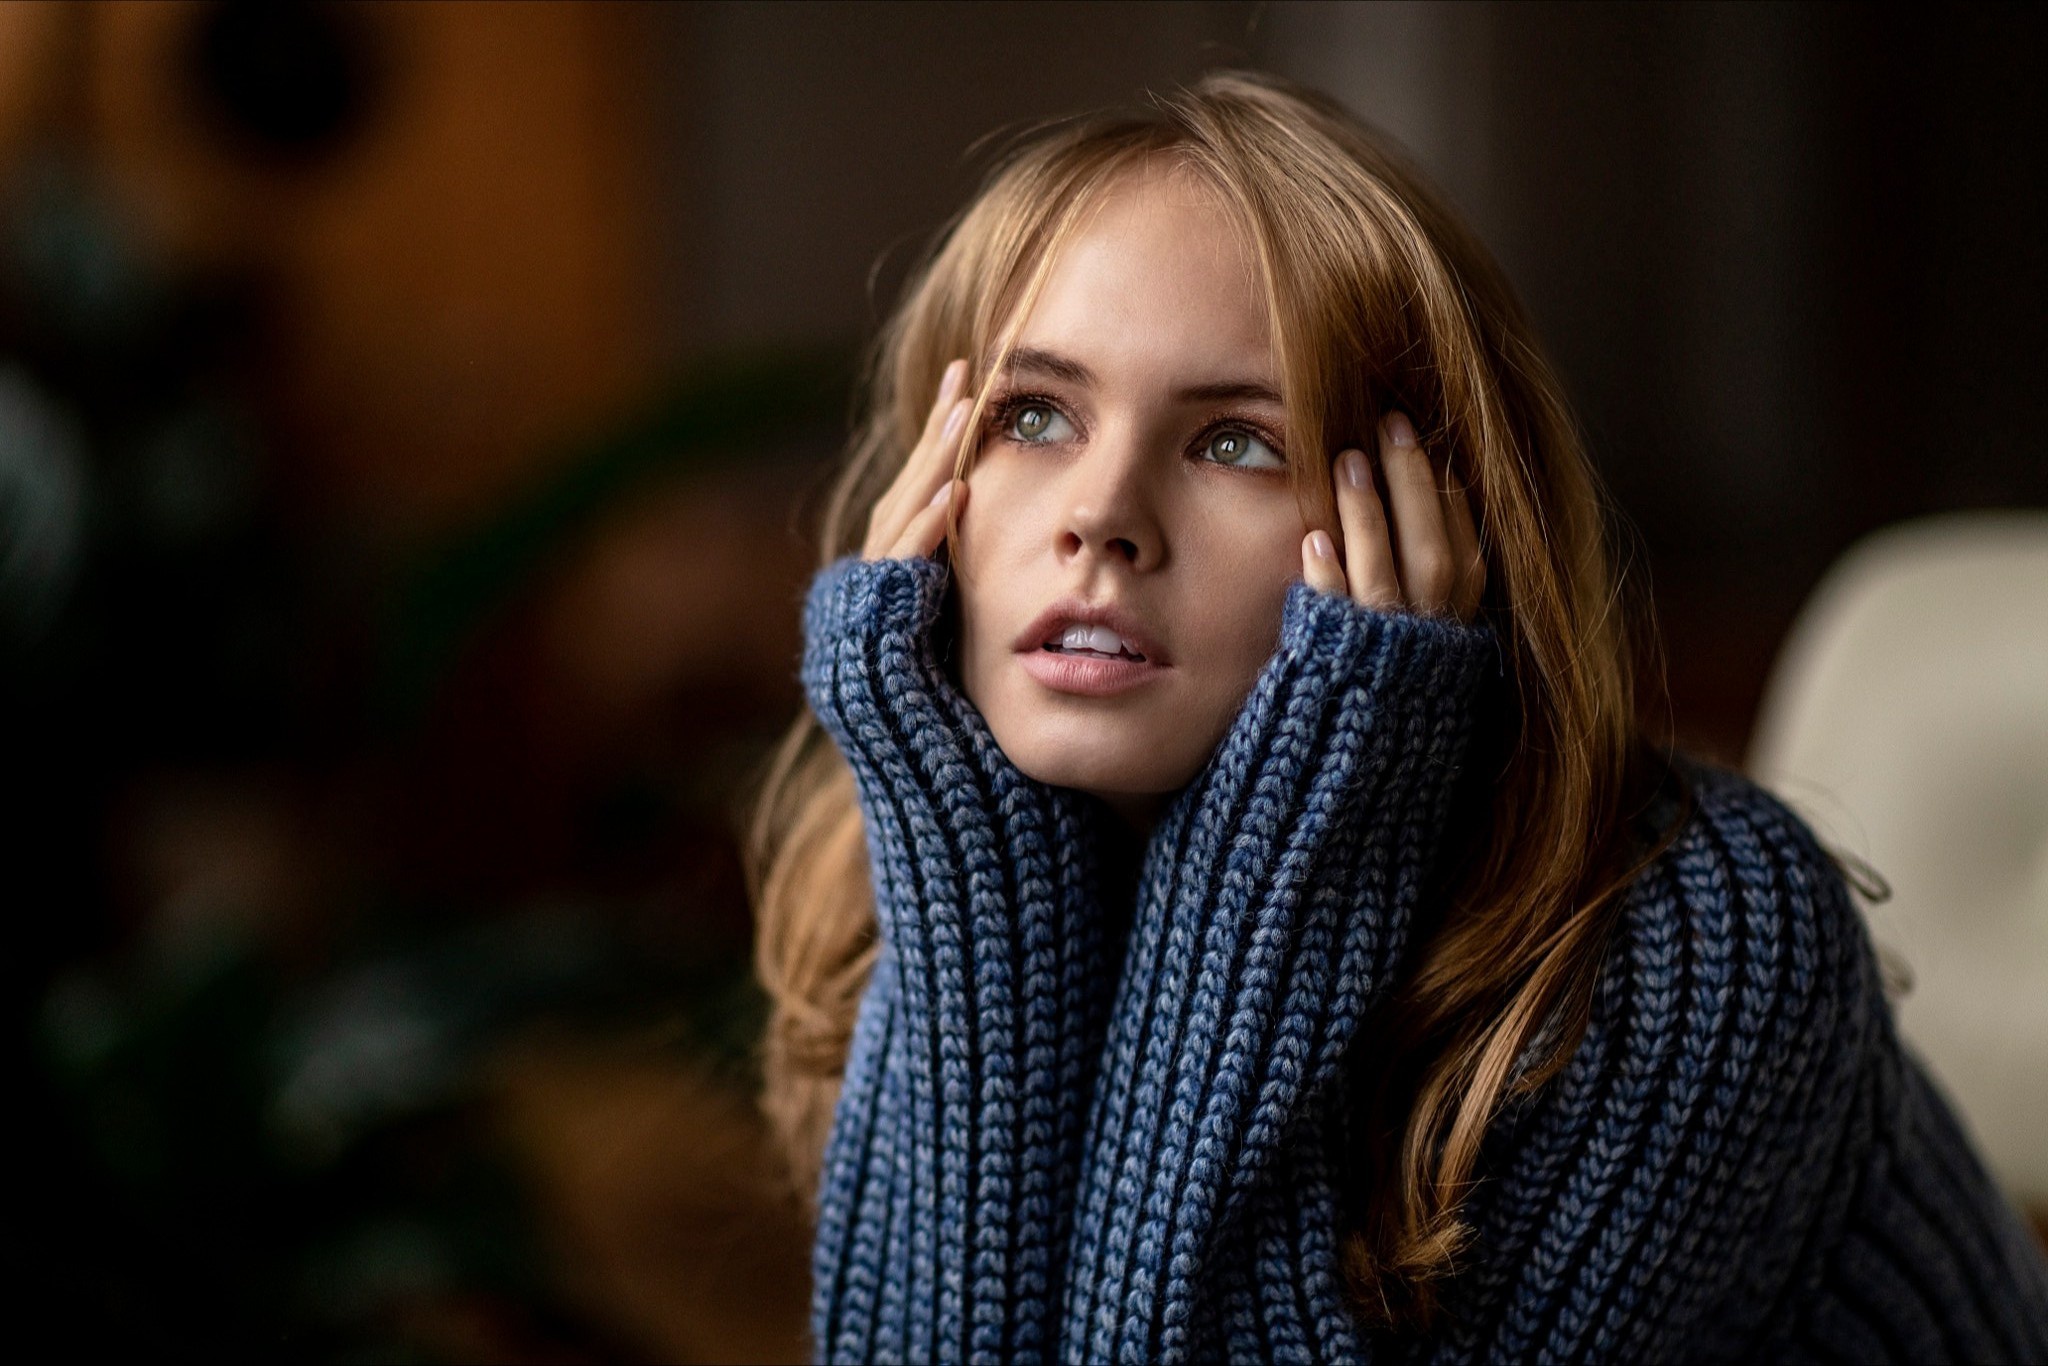 Blonde Girl With Sweater - HD Wallpaper 